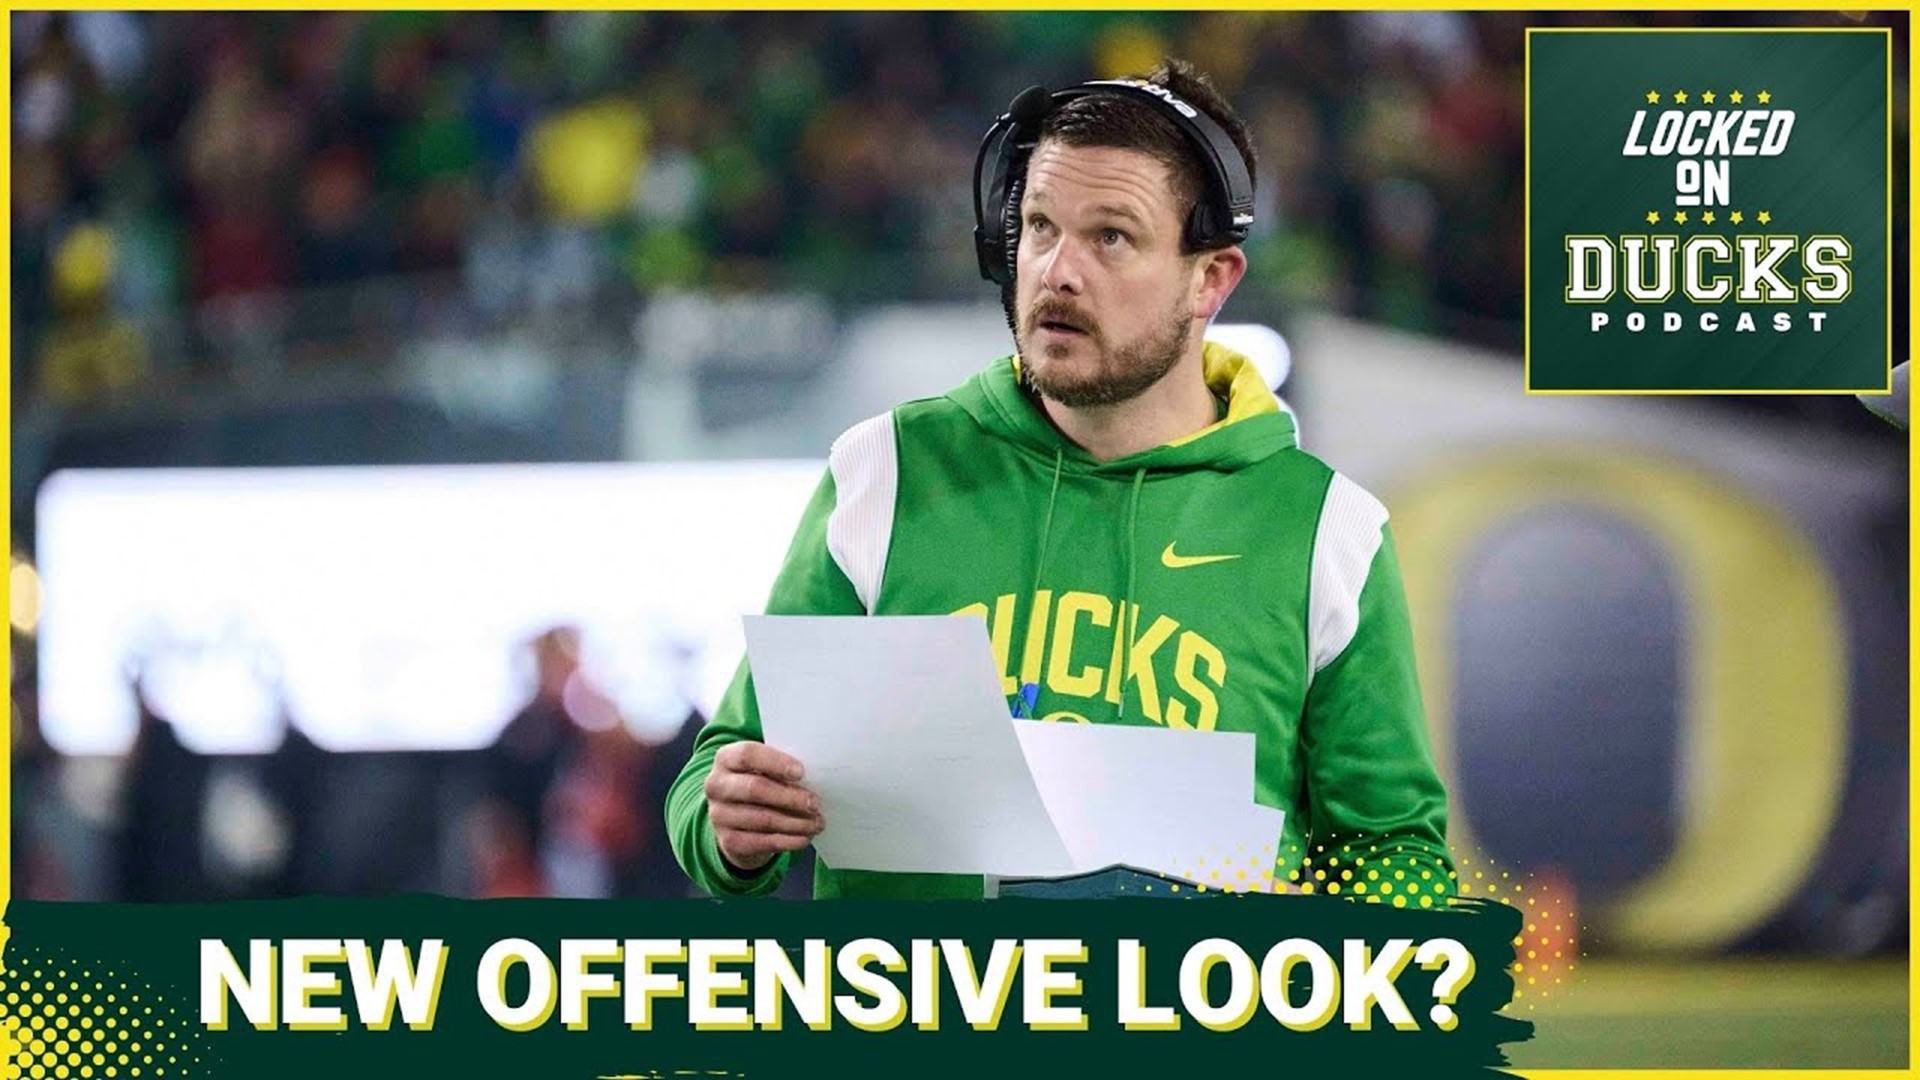 What did Coach Stein's offense show this season as it helped lead UTSA to a C-USA championship and 11-win season? And how does that apply to his new role at Oregon?